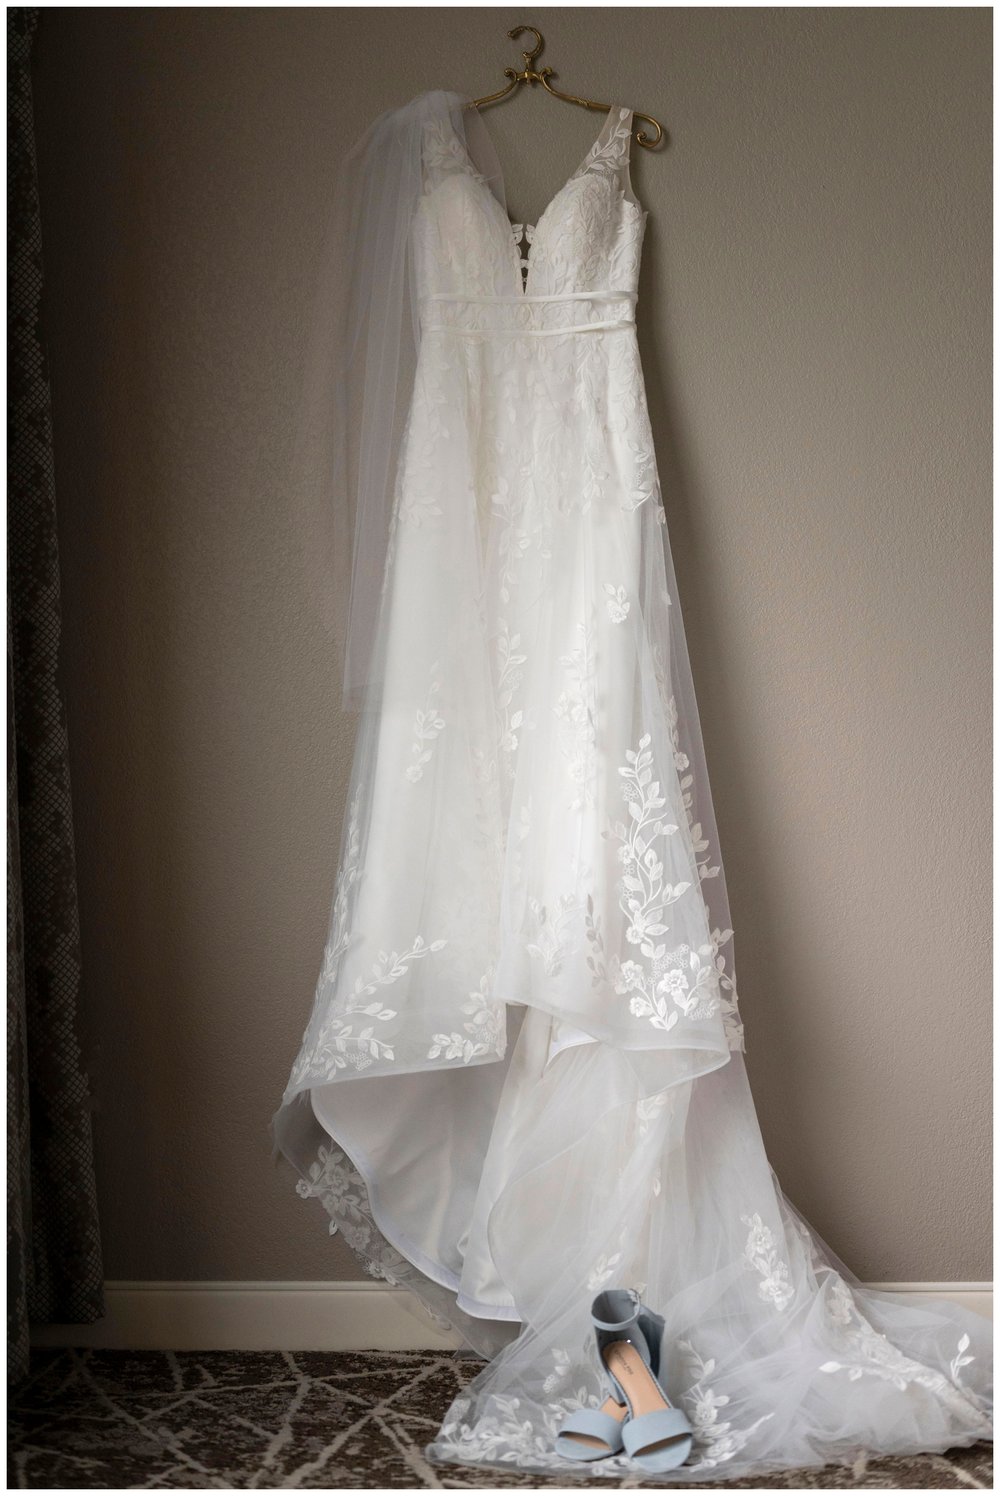 white wedding gown hanging on a door frame